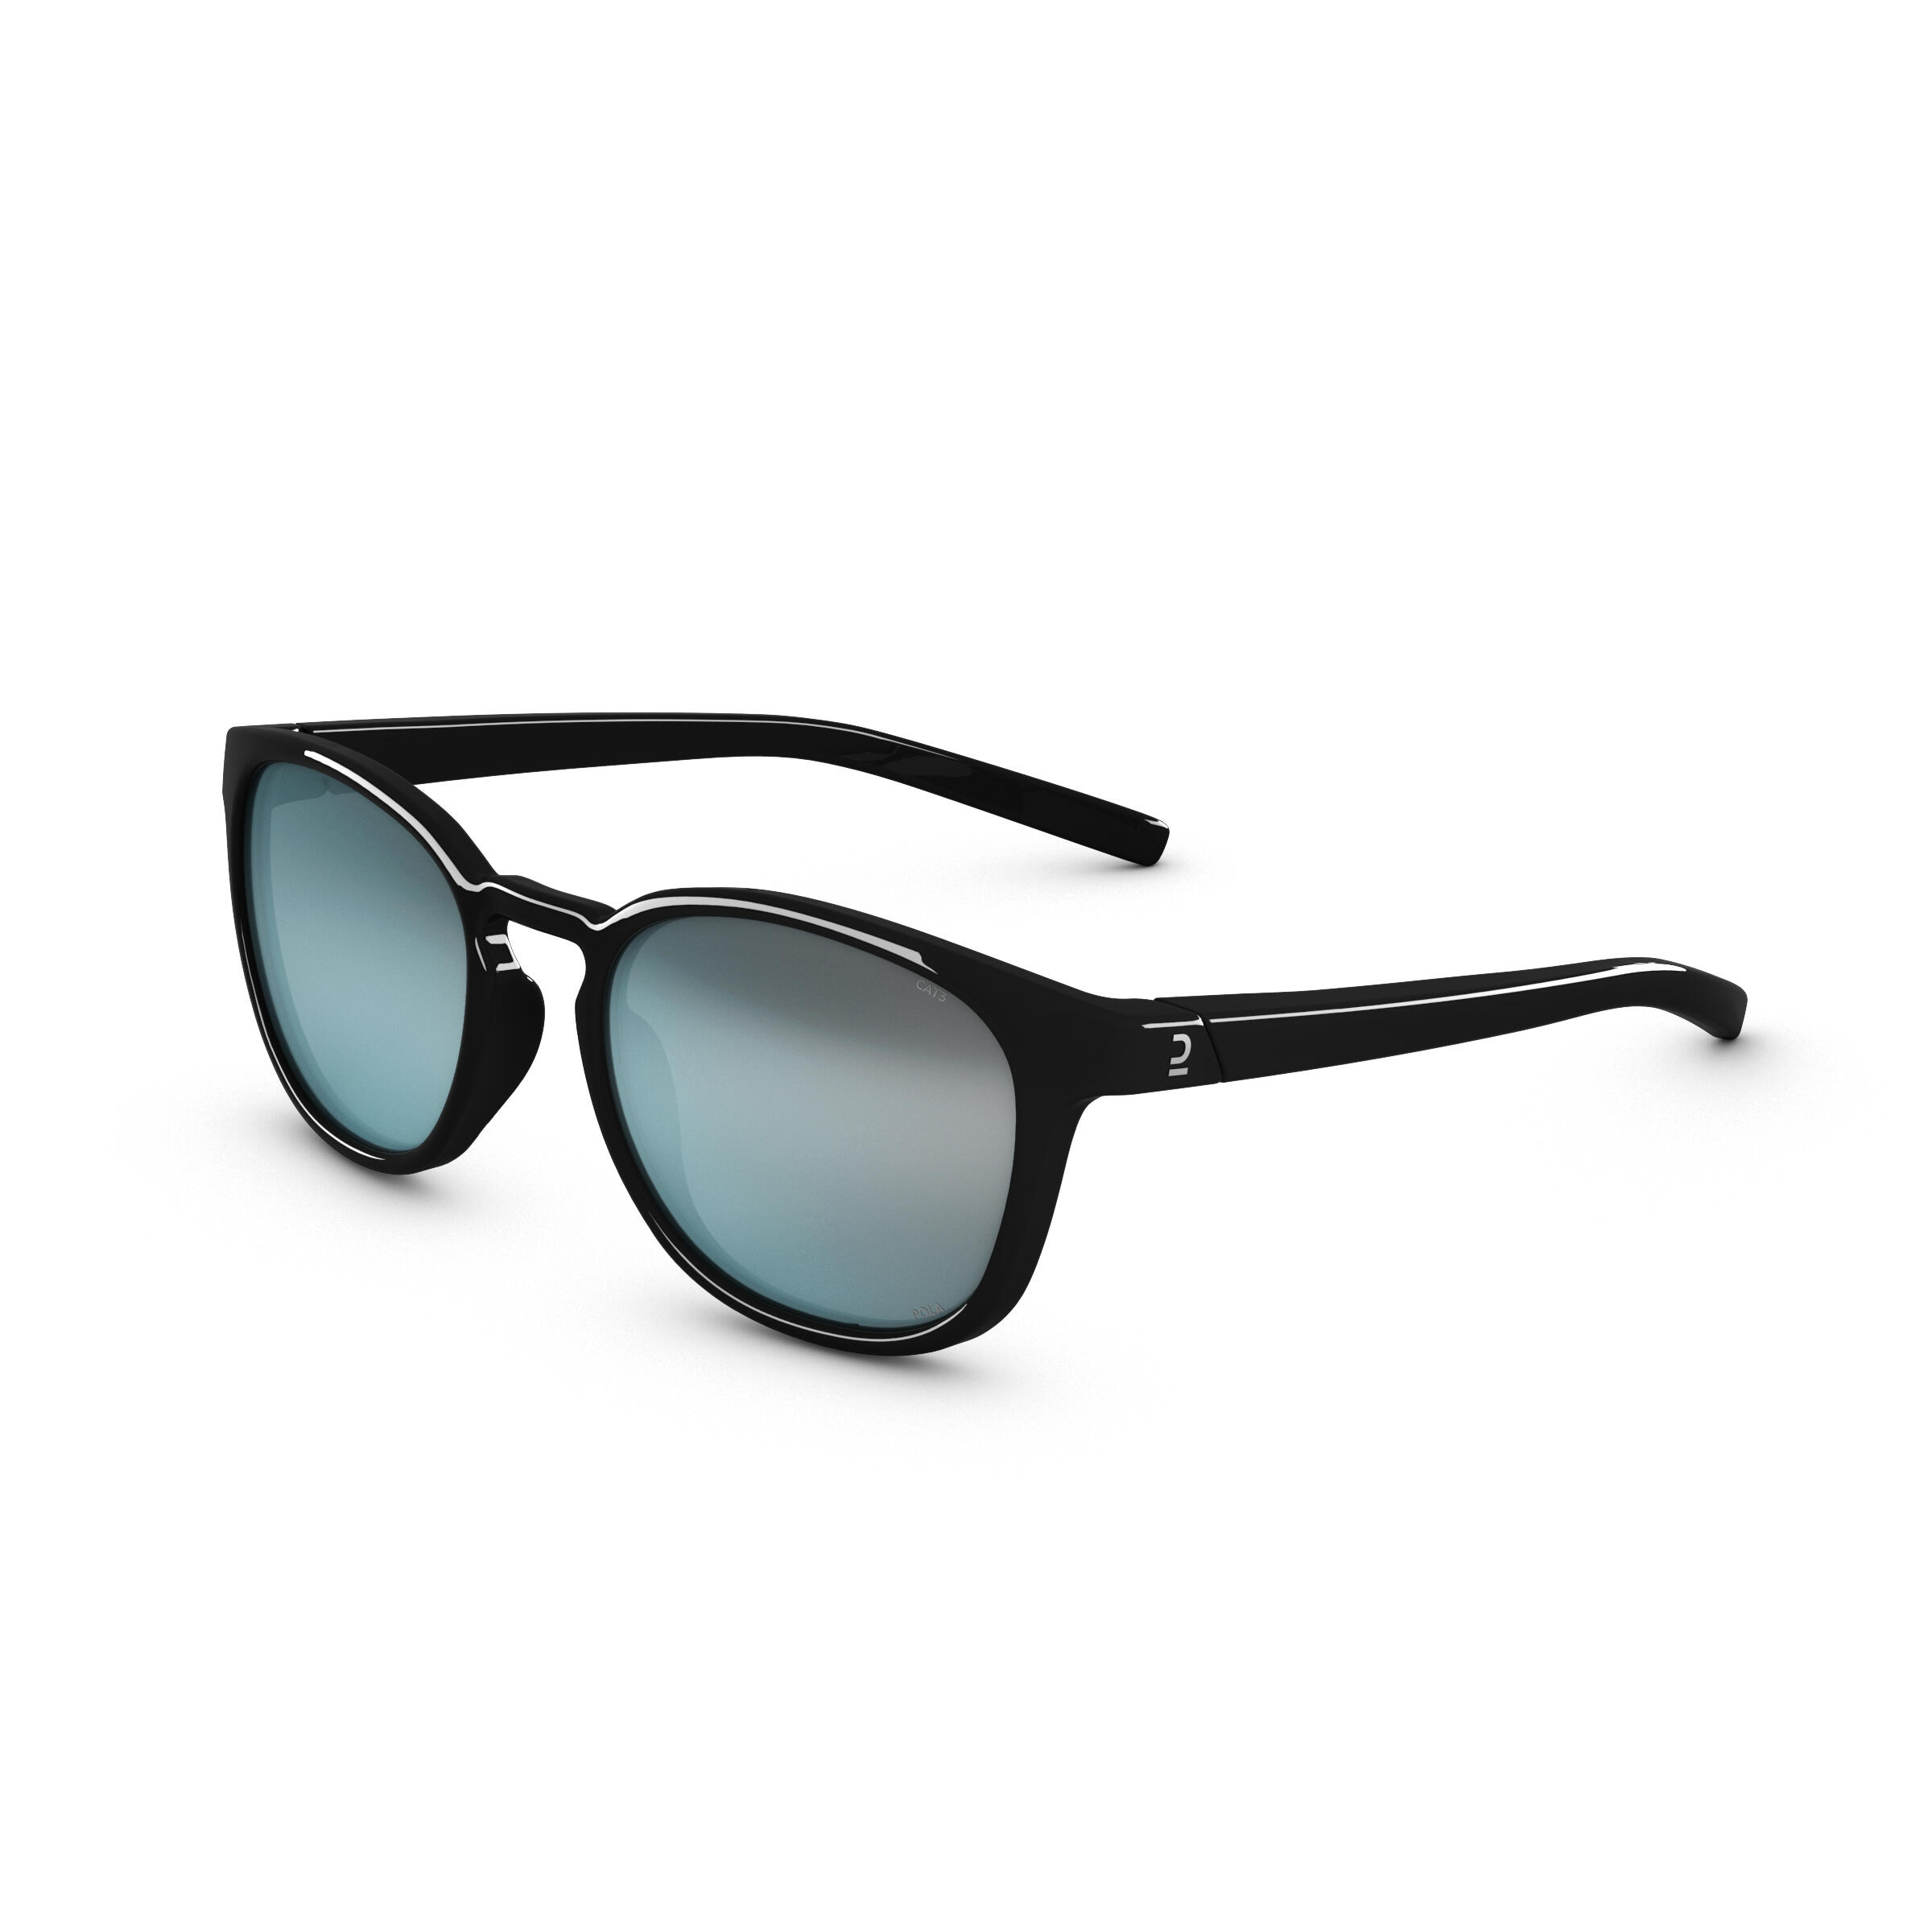 Quechua By Decathlon Grey Sports Sunglasses with Polarised and UV Protected  Lens 8676418 Price in India, Full Specifications & Offers | DTashion.com